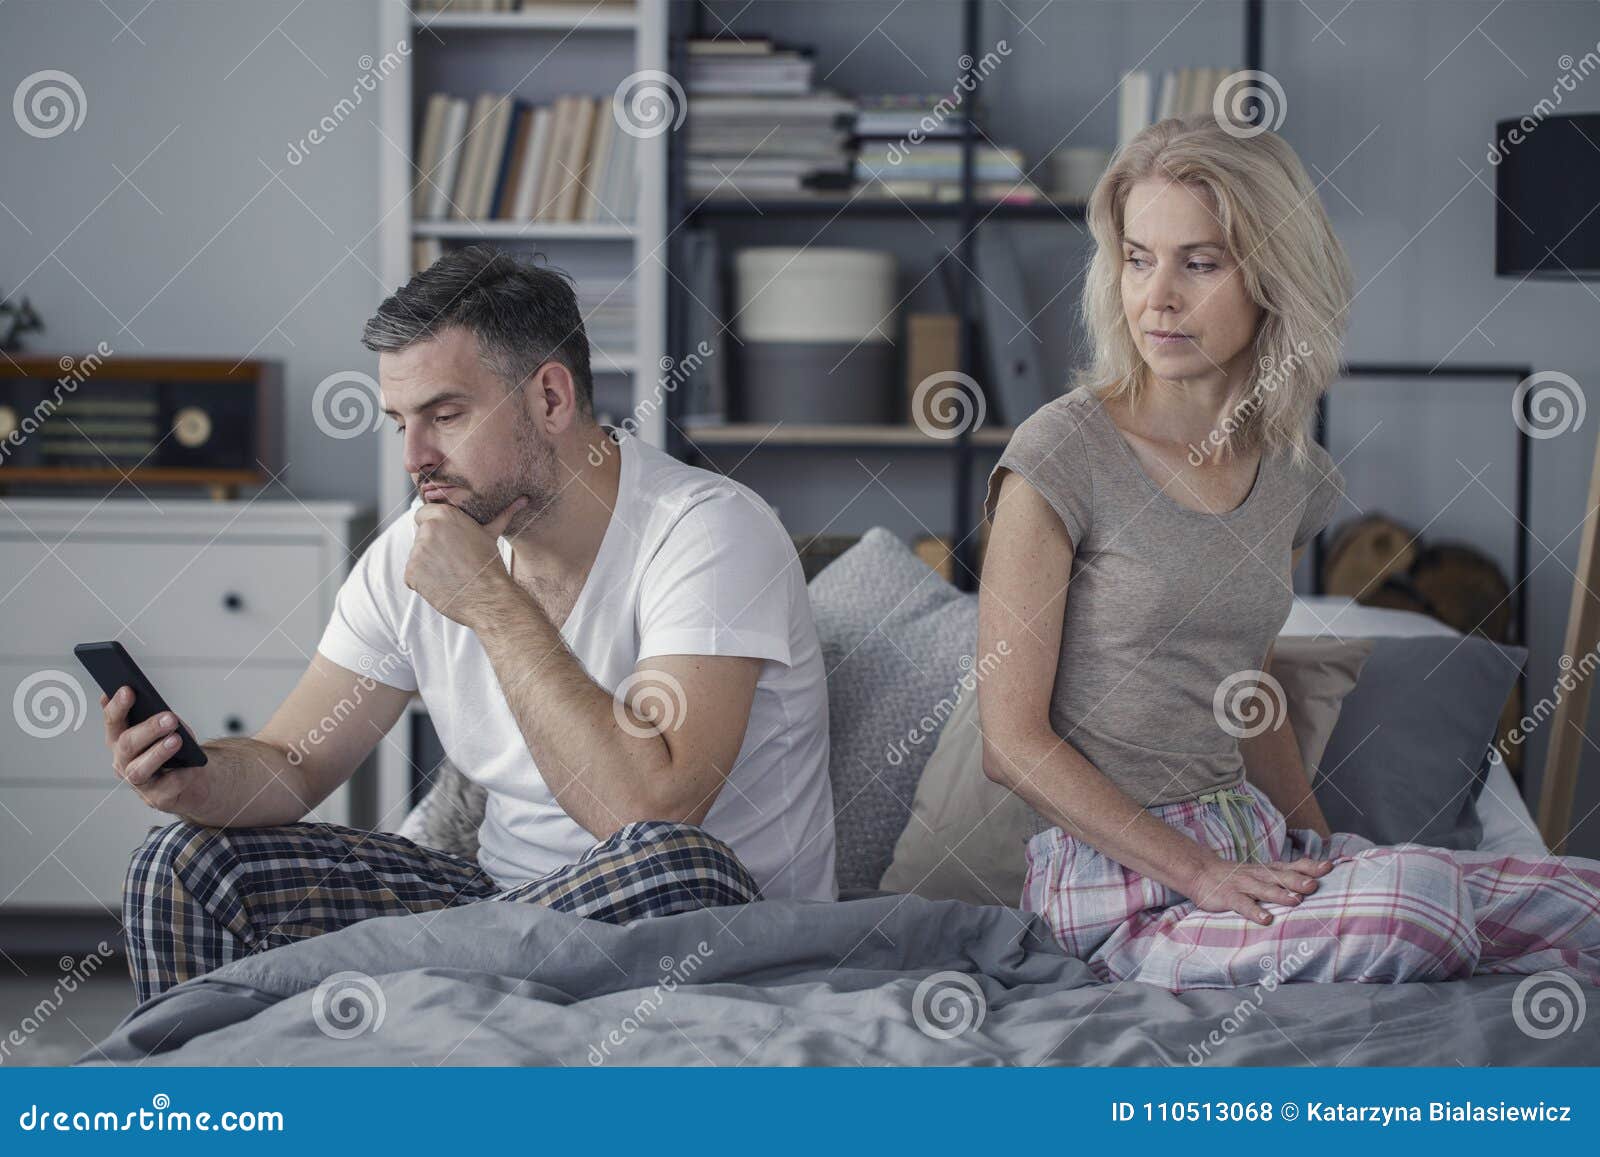 offended wife and cheating husband